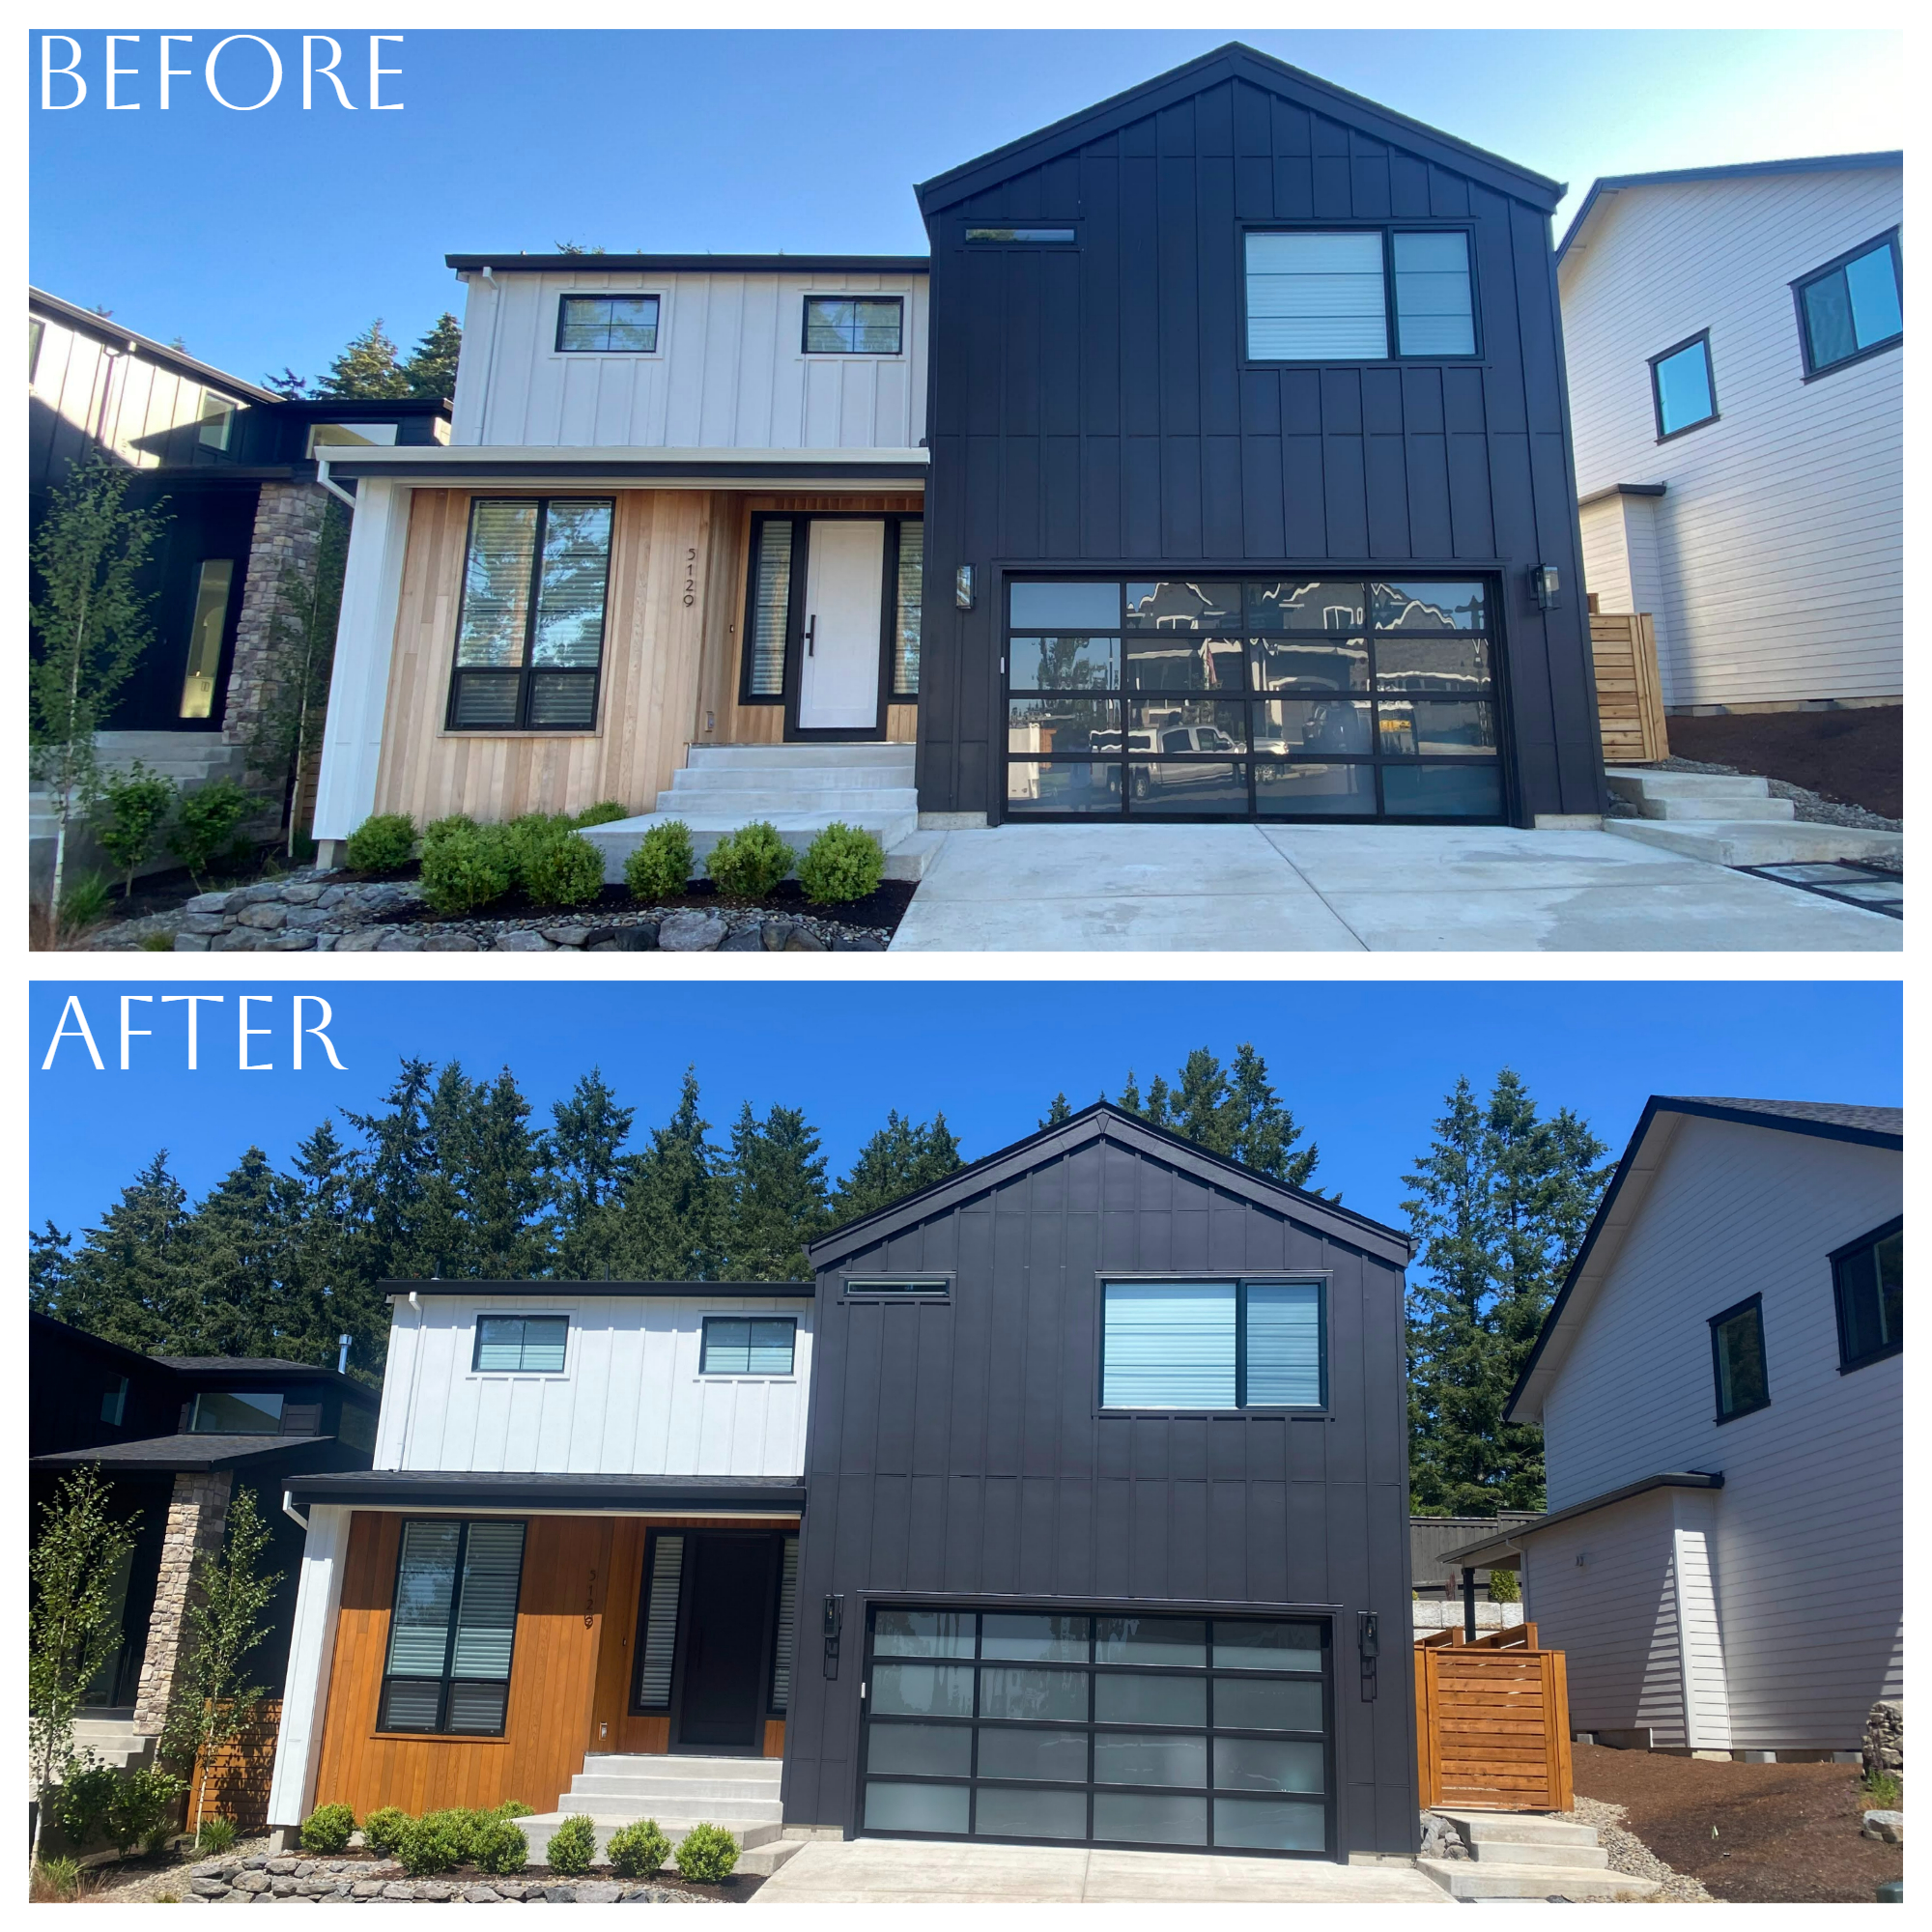 Before and after photos showcasing the transformation of a home through exterior painting with a black garage door.